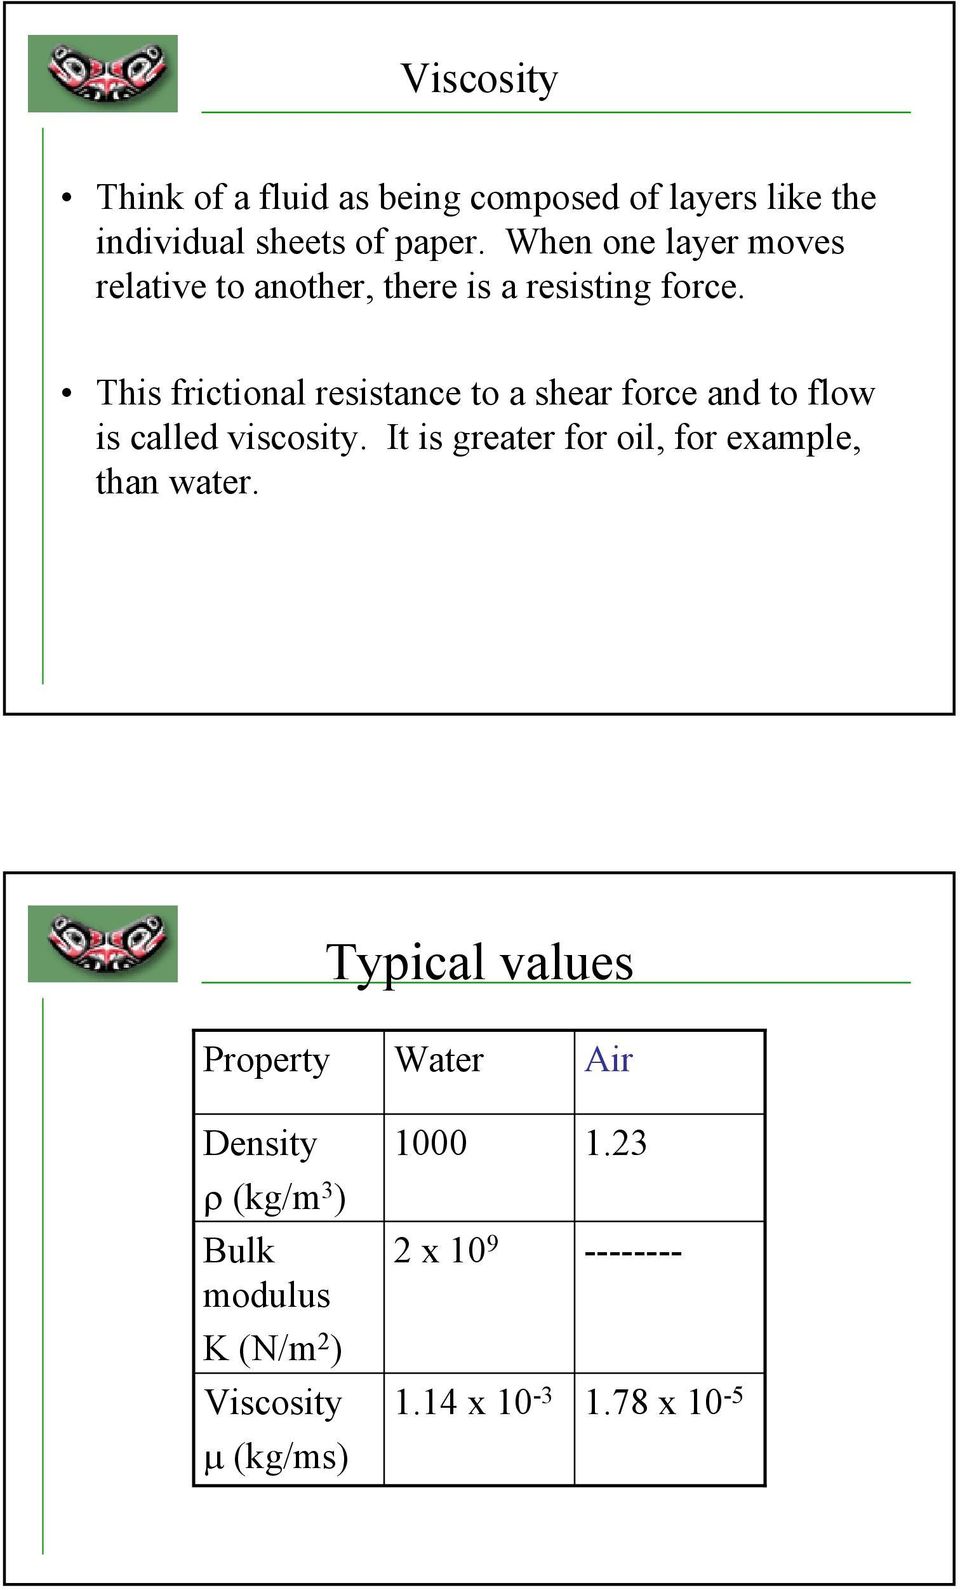 This frictional resistance to a shear force and to flow is called viscosity.